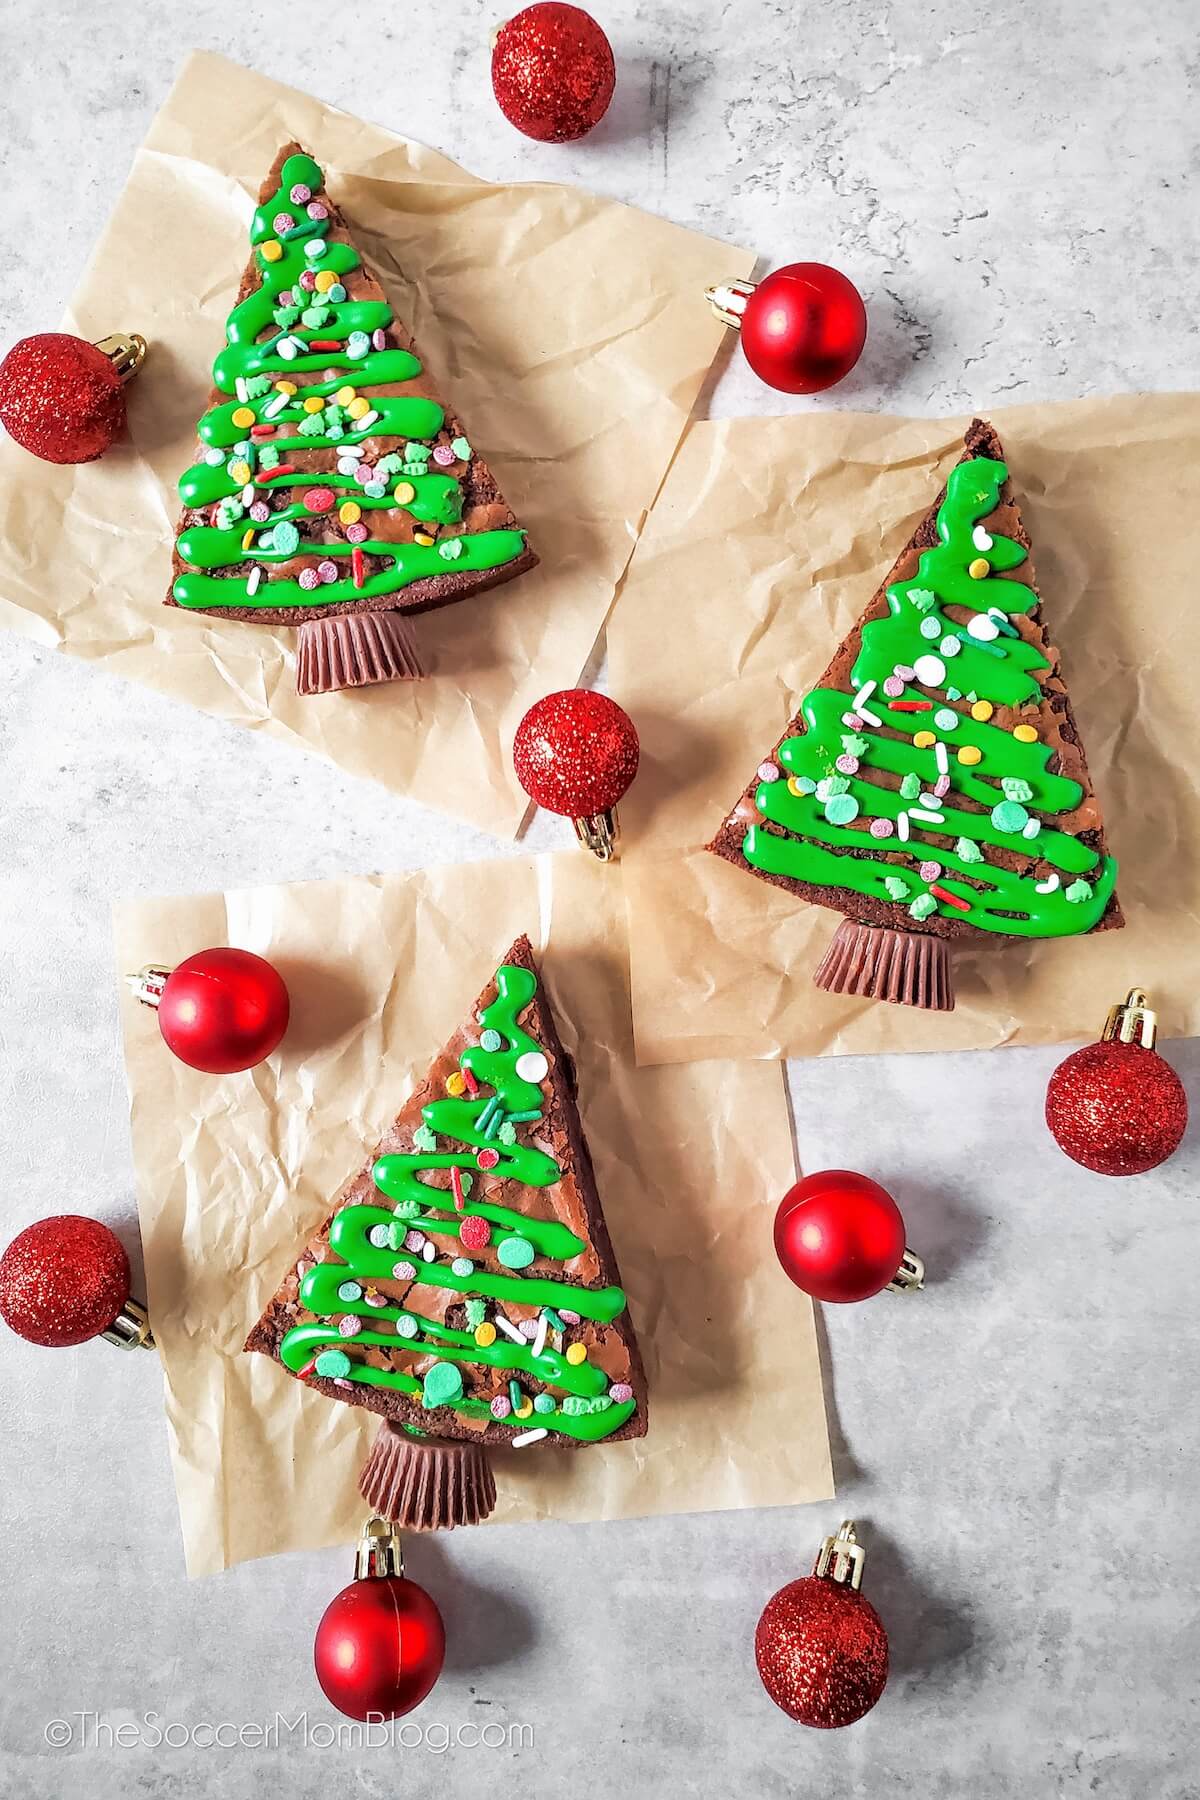 3 brownies shaped and decorated like Christmas trees.